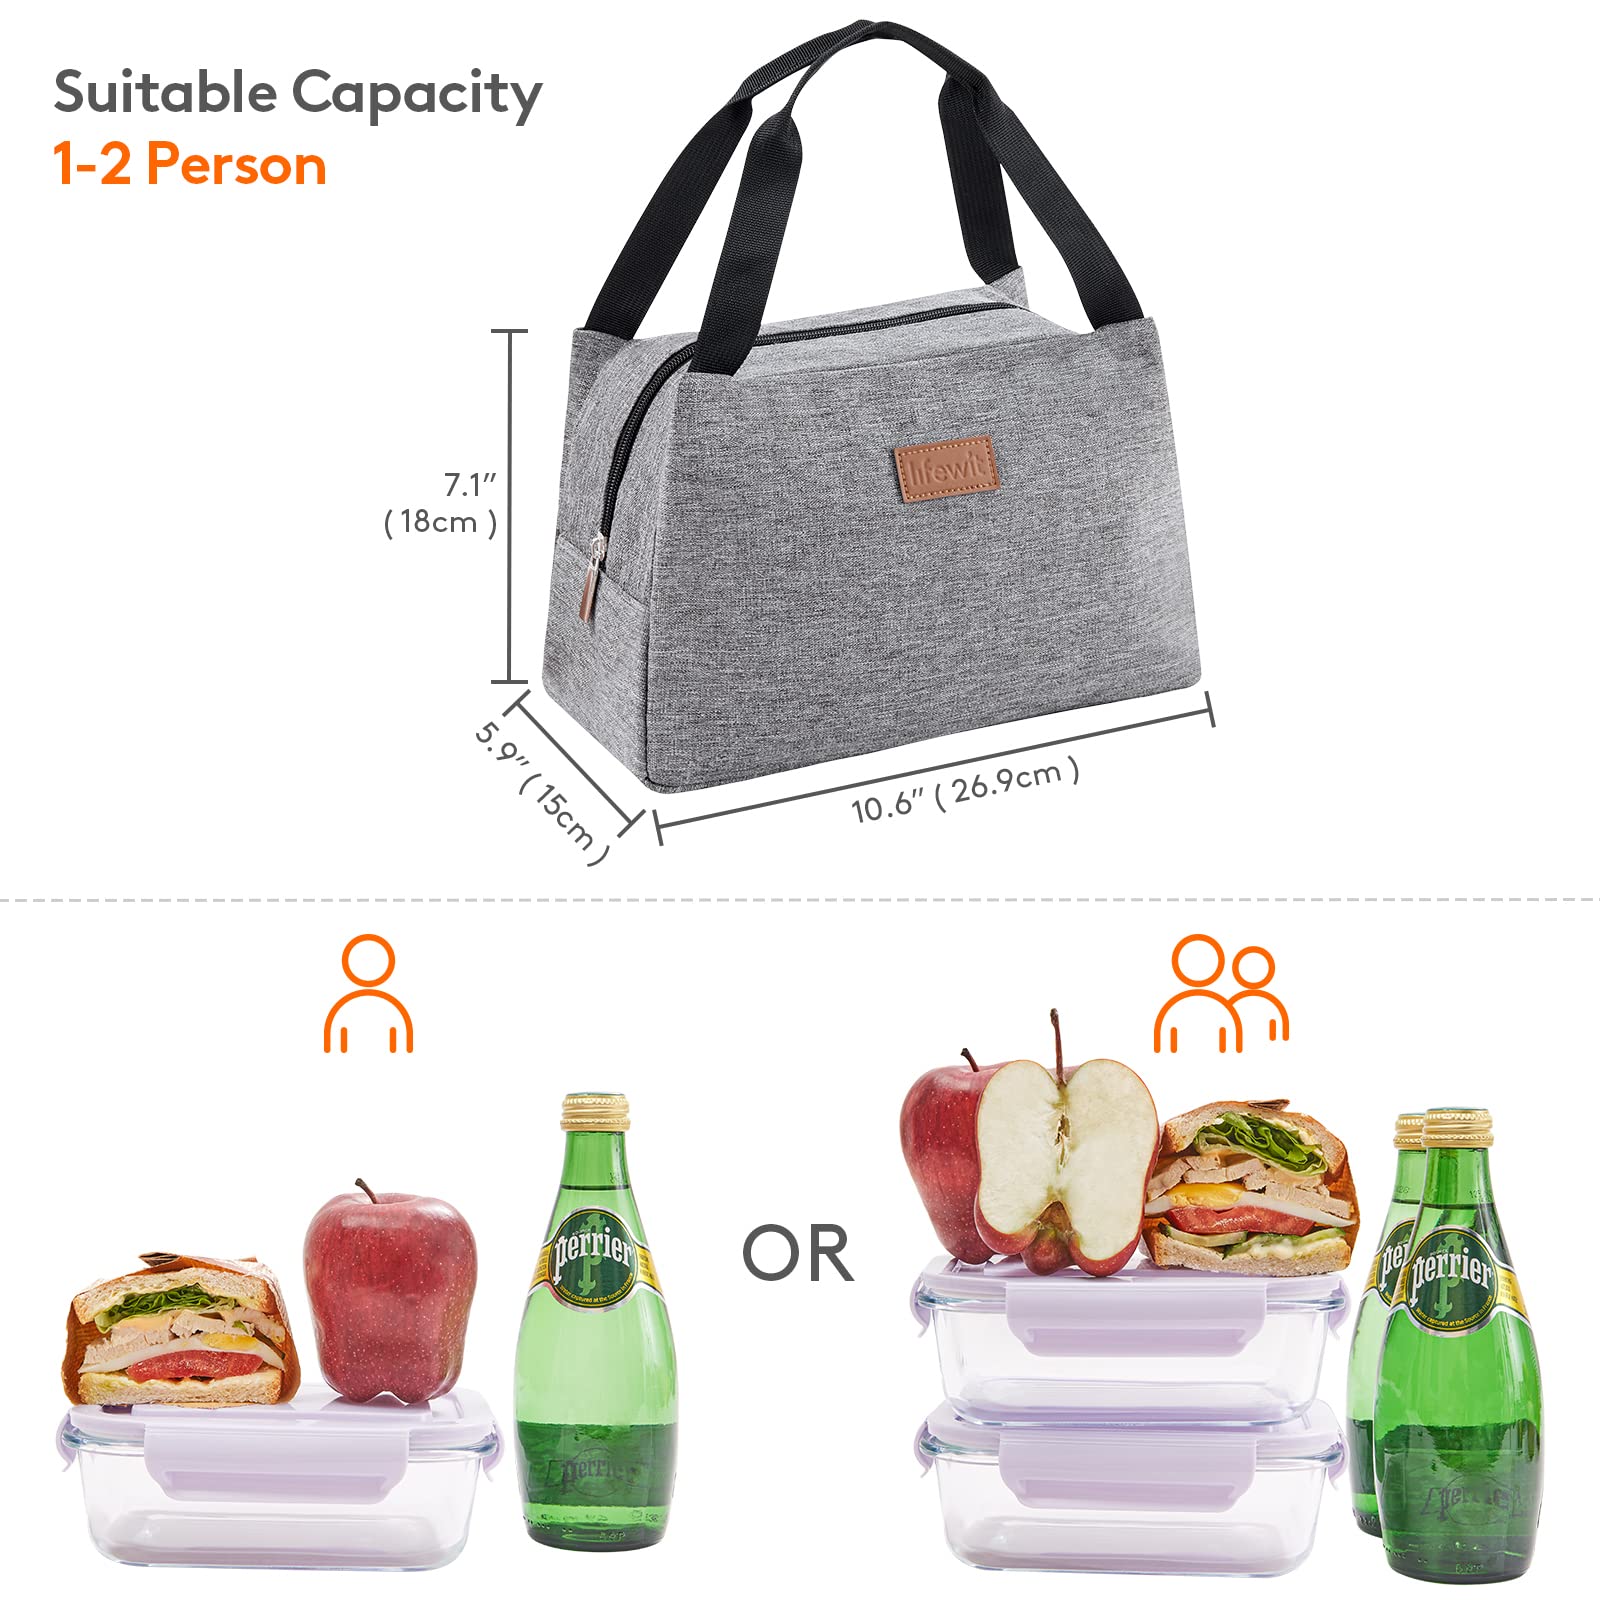 Lifewit 24L Collapsible Cooler Bag and 7L Insulated Lunch Bag Grey